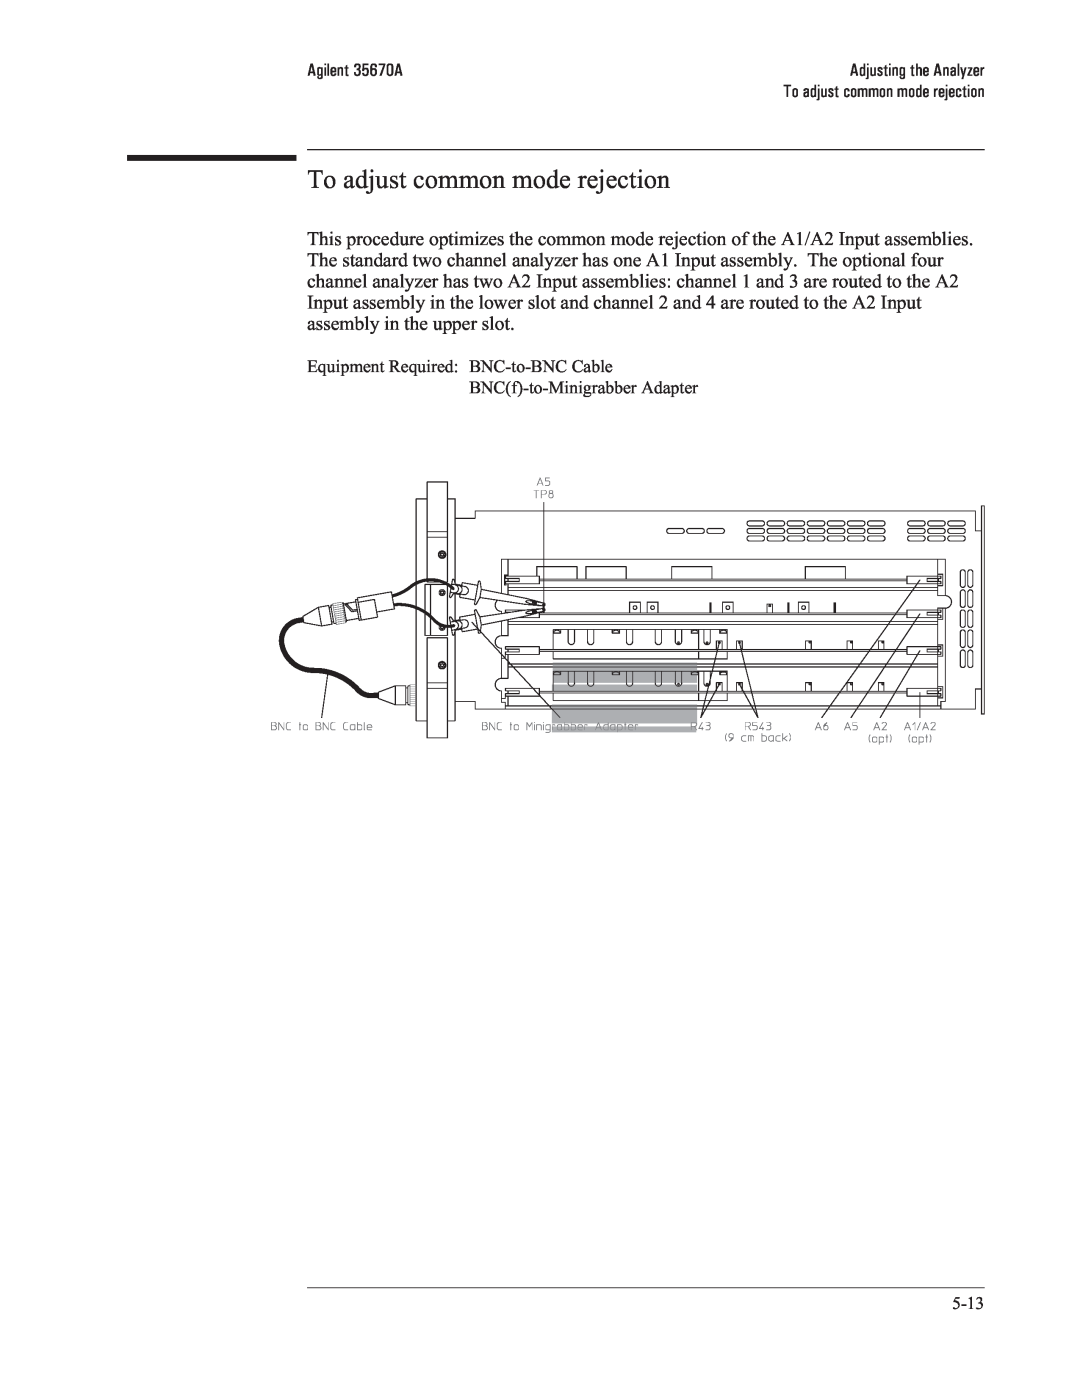 Agilent Technologies 35670-90066 manual To adjust common mode rejection, Equipment Required BNC-to-BNCCable 